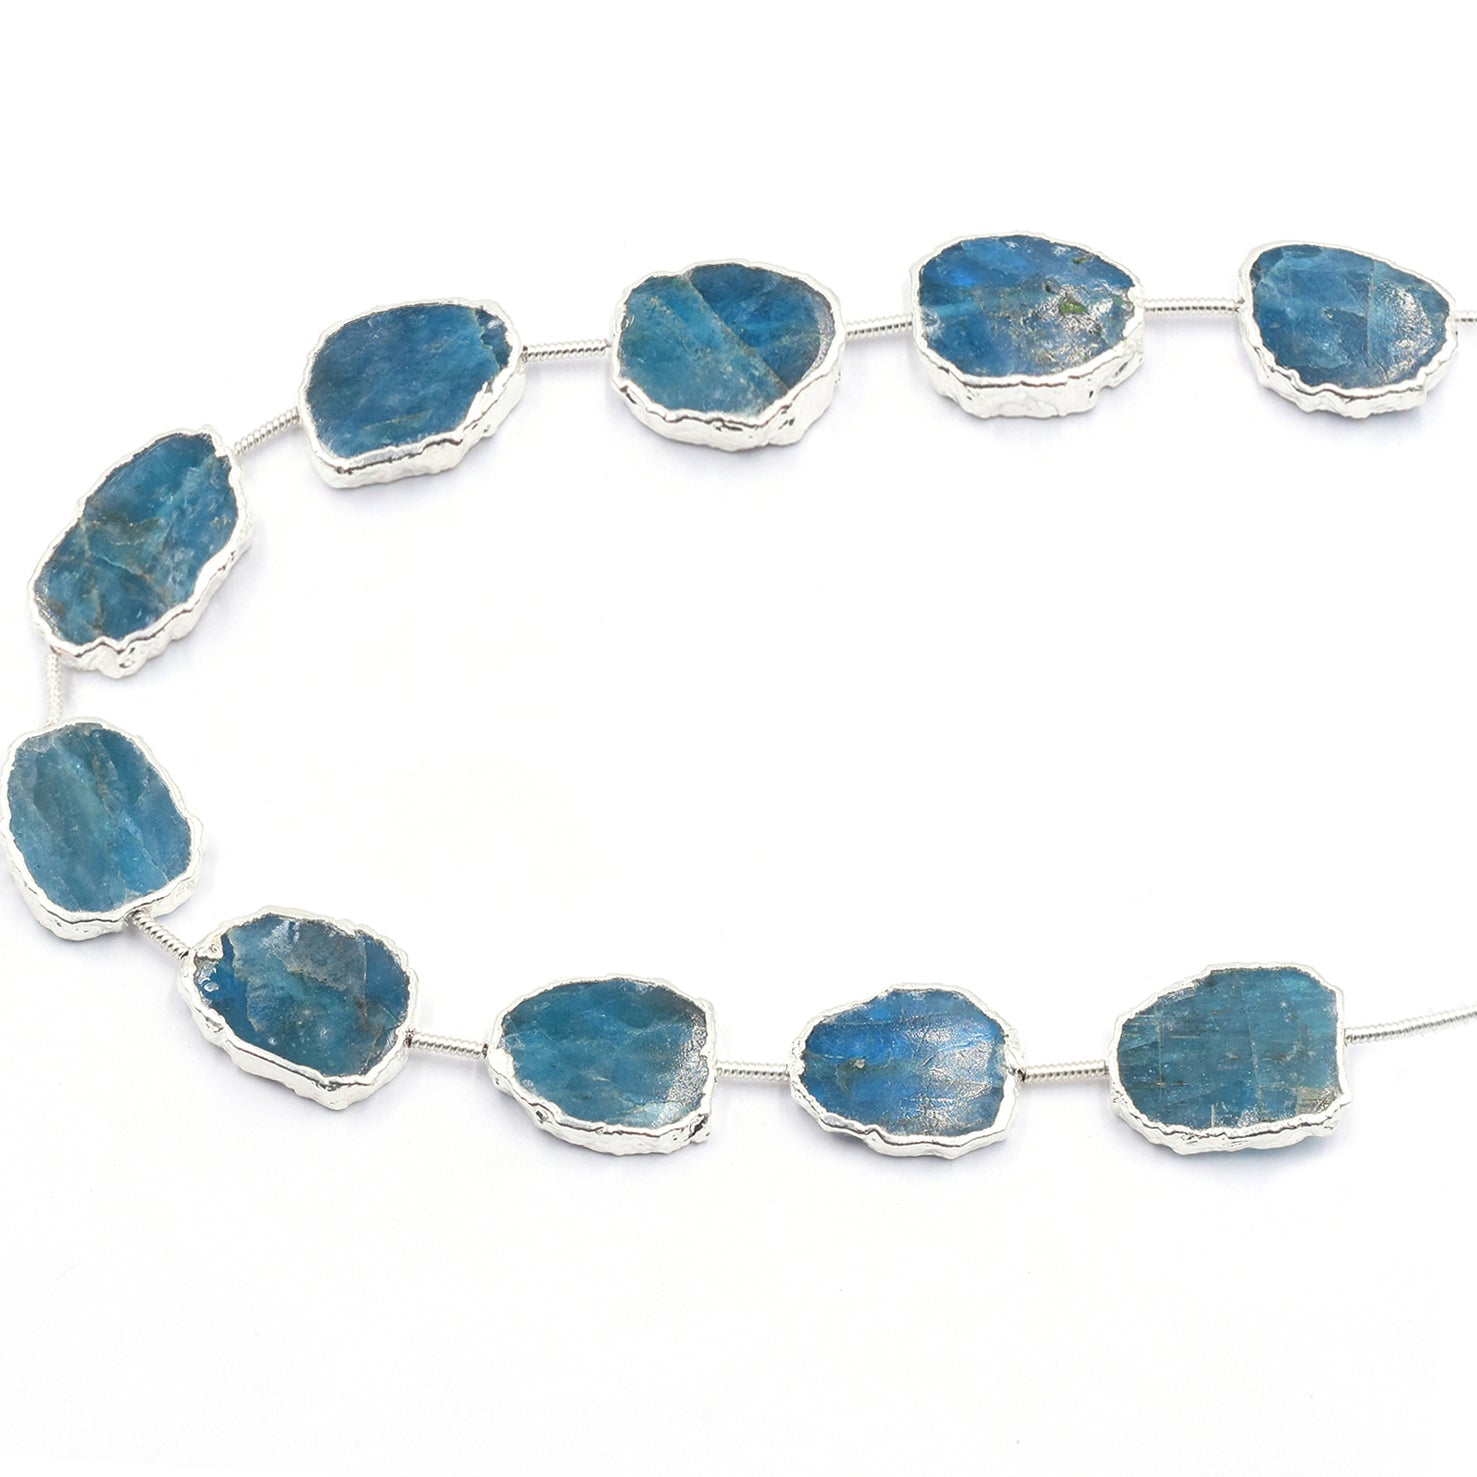 Neon Blue Apatite 15X12 MM Uneven Shape Straight Drilled Rhodium Electroplated Strand - Jaipur Gem Factory